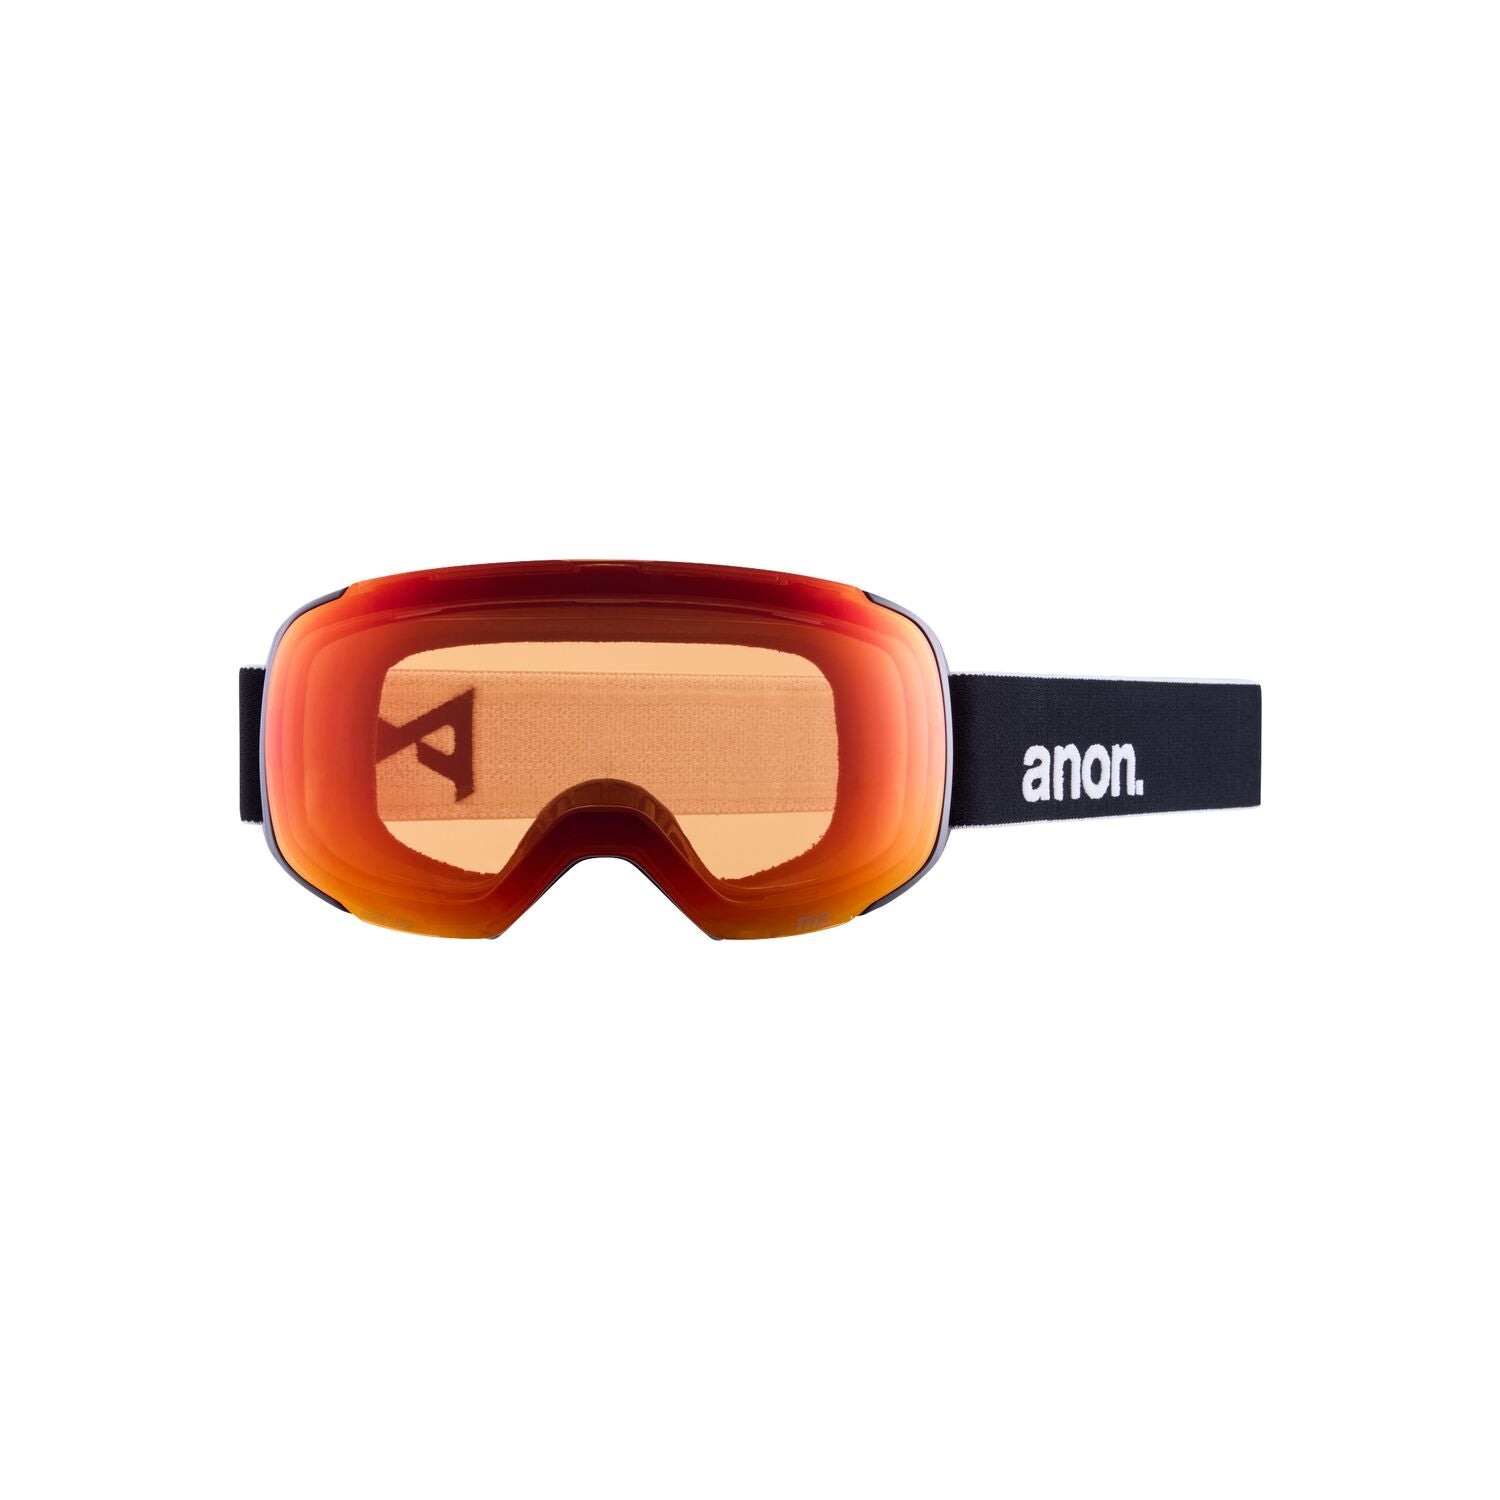 Anon M2 MFI Goggle 2023 Black - Perceive Sunny Red w/ Perceive Cloudy Burst Lens